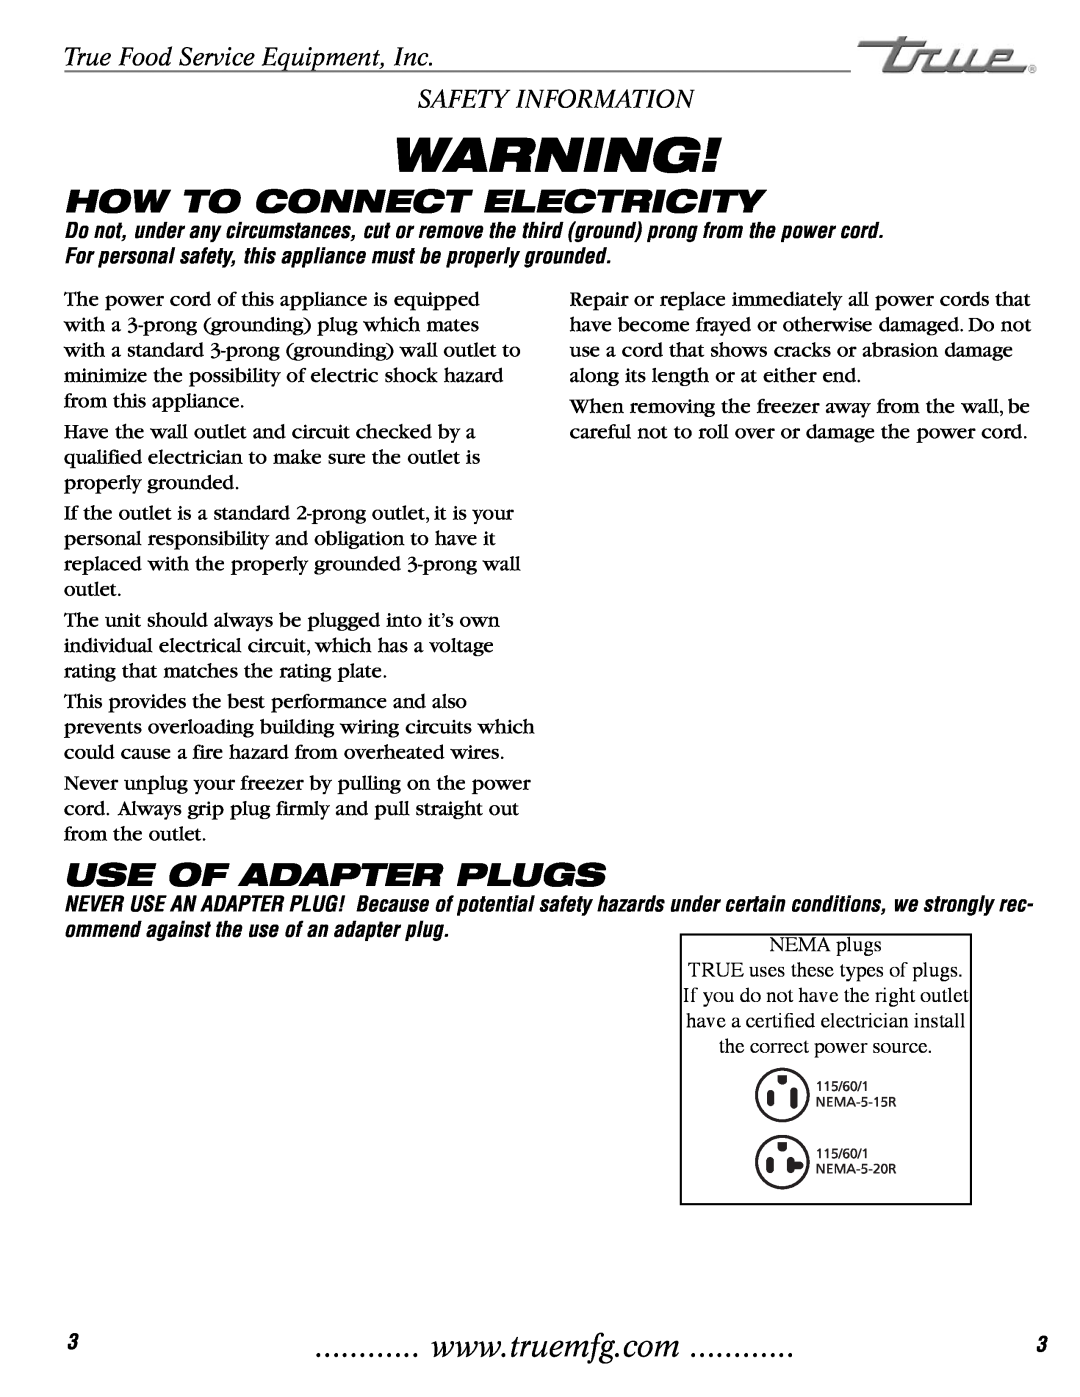 True Manufacturing Company TCGG-48-S How To Connect Electricity, True Food Service Equipment, Inc SAFETY INFORMATION 